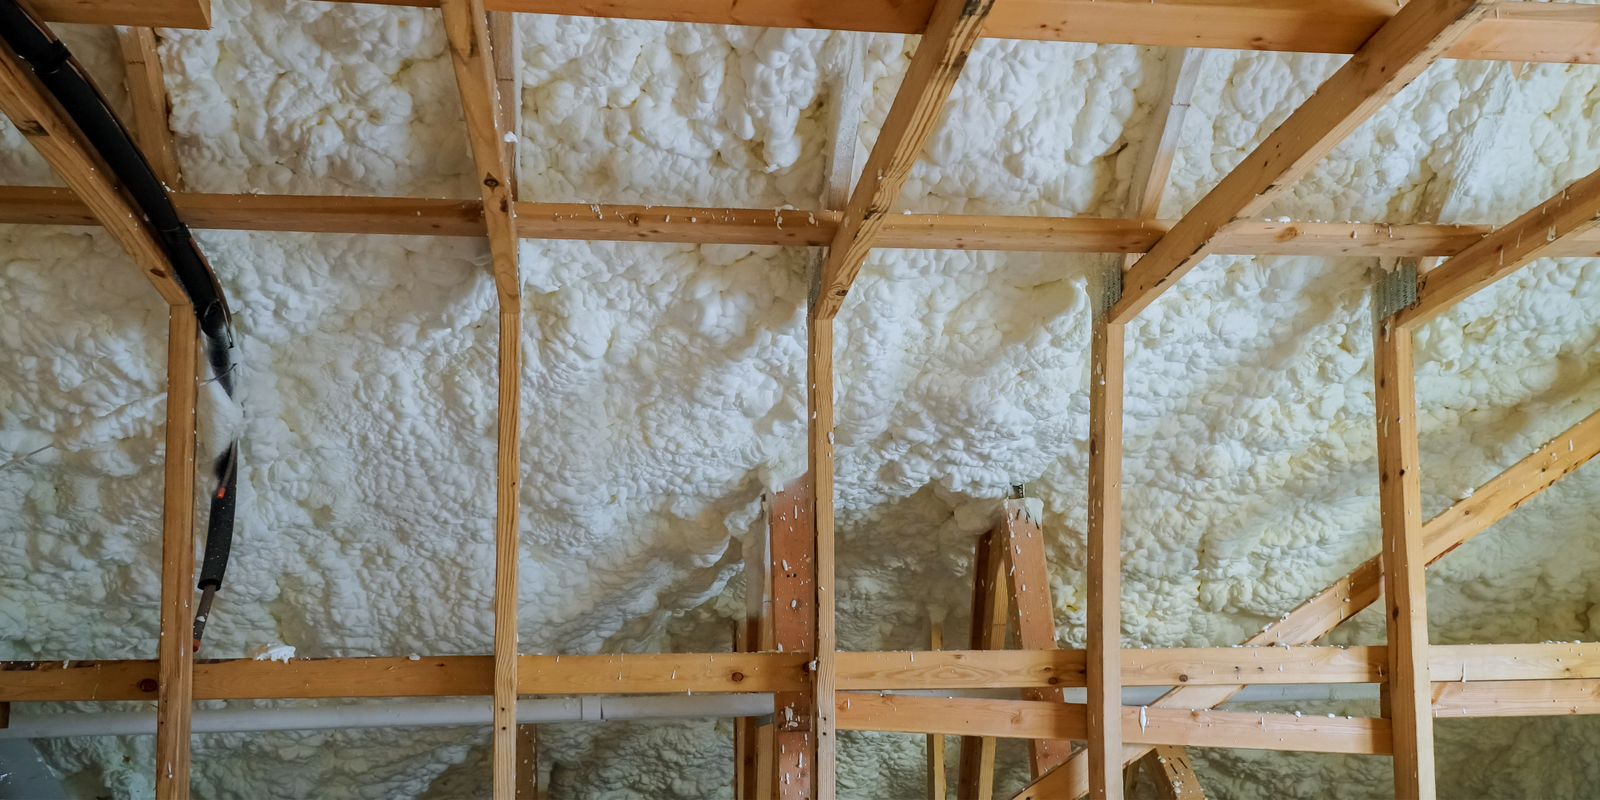 Insulation Company in Roseville MN